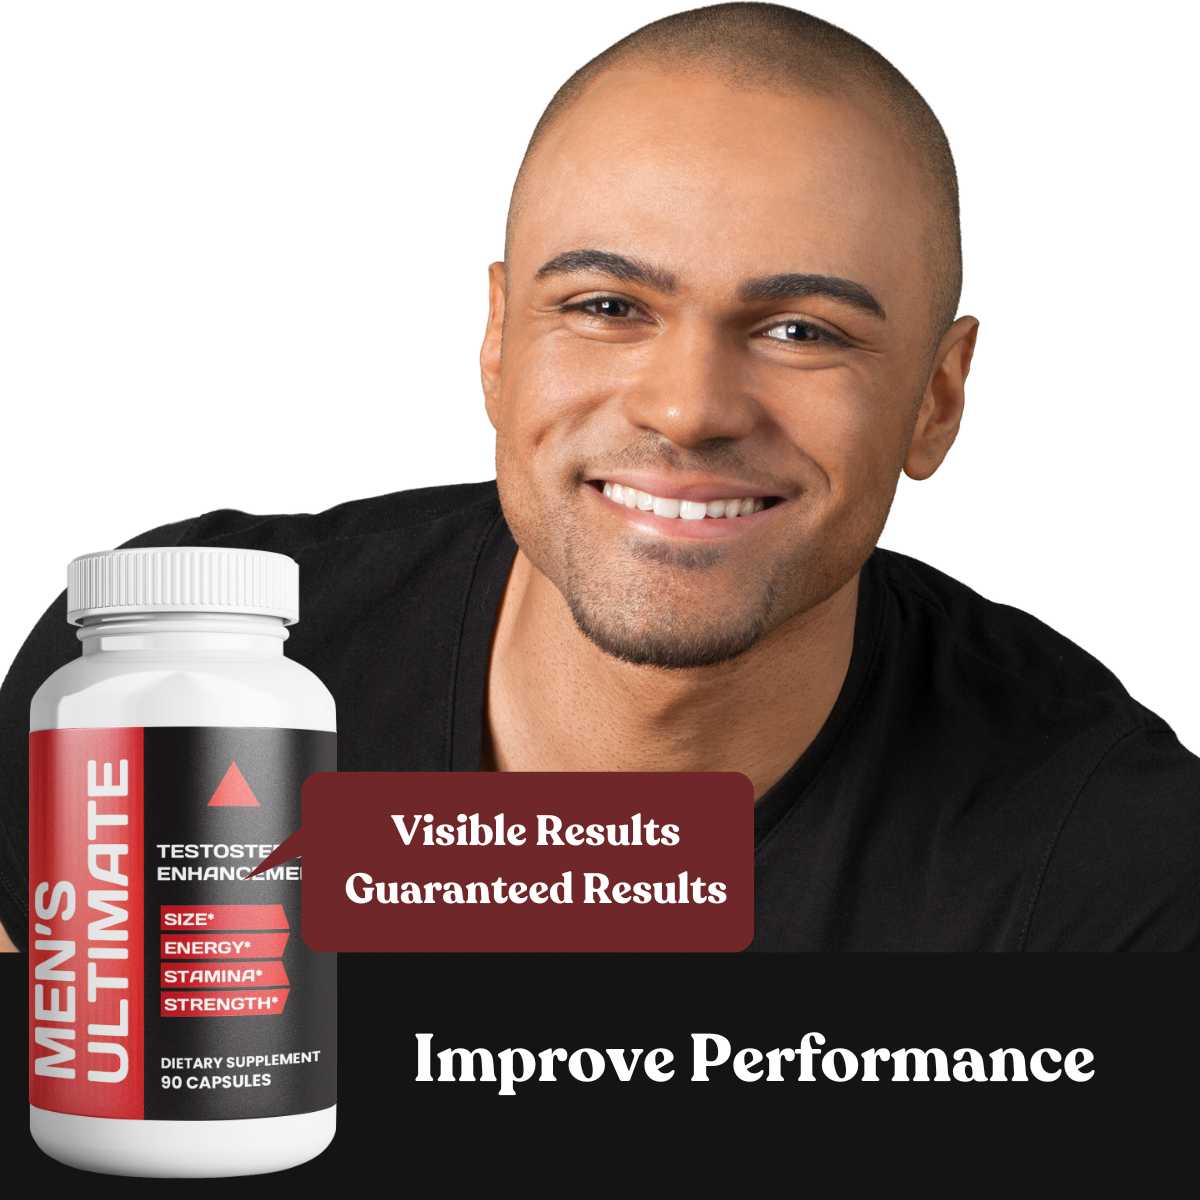 Energize Your Performance - Ultimate Endurance - Stamina & Energy | 3-Pack - Herblif Nutrition USA